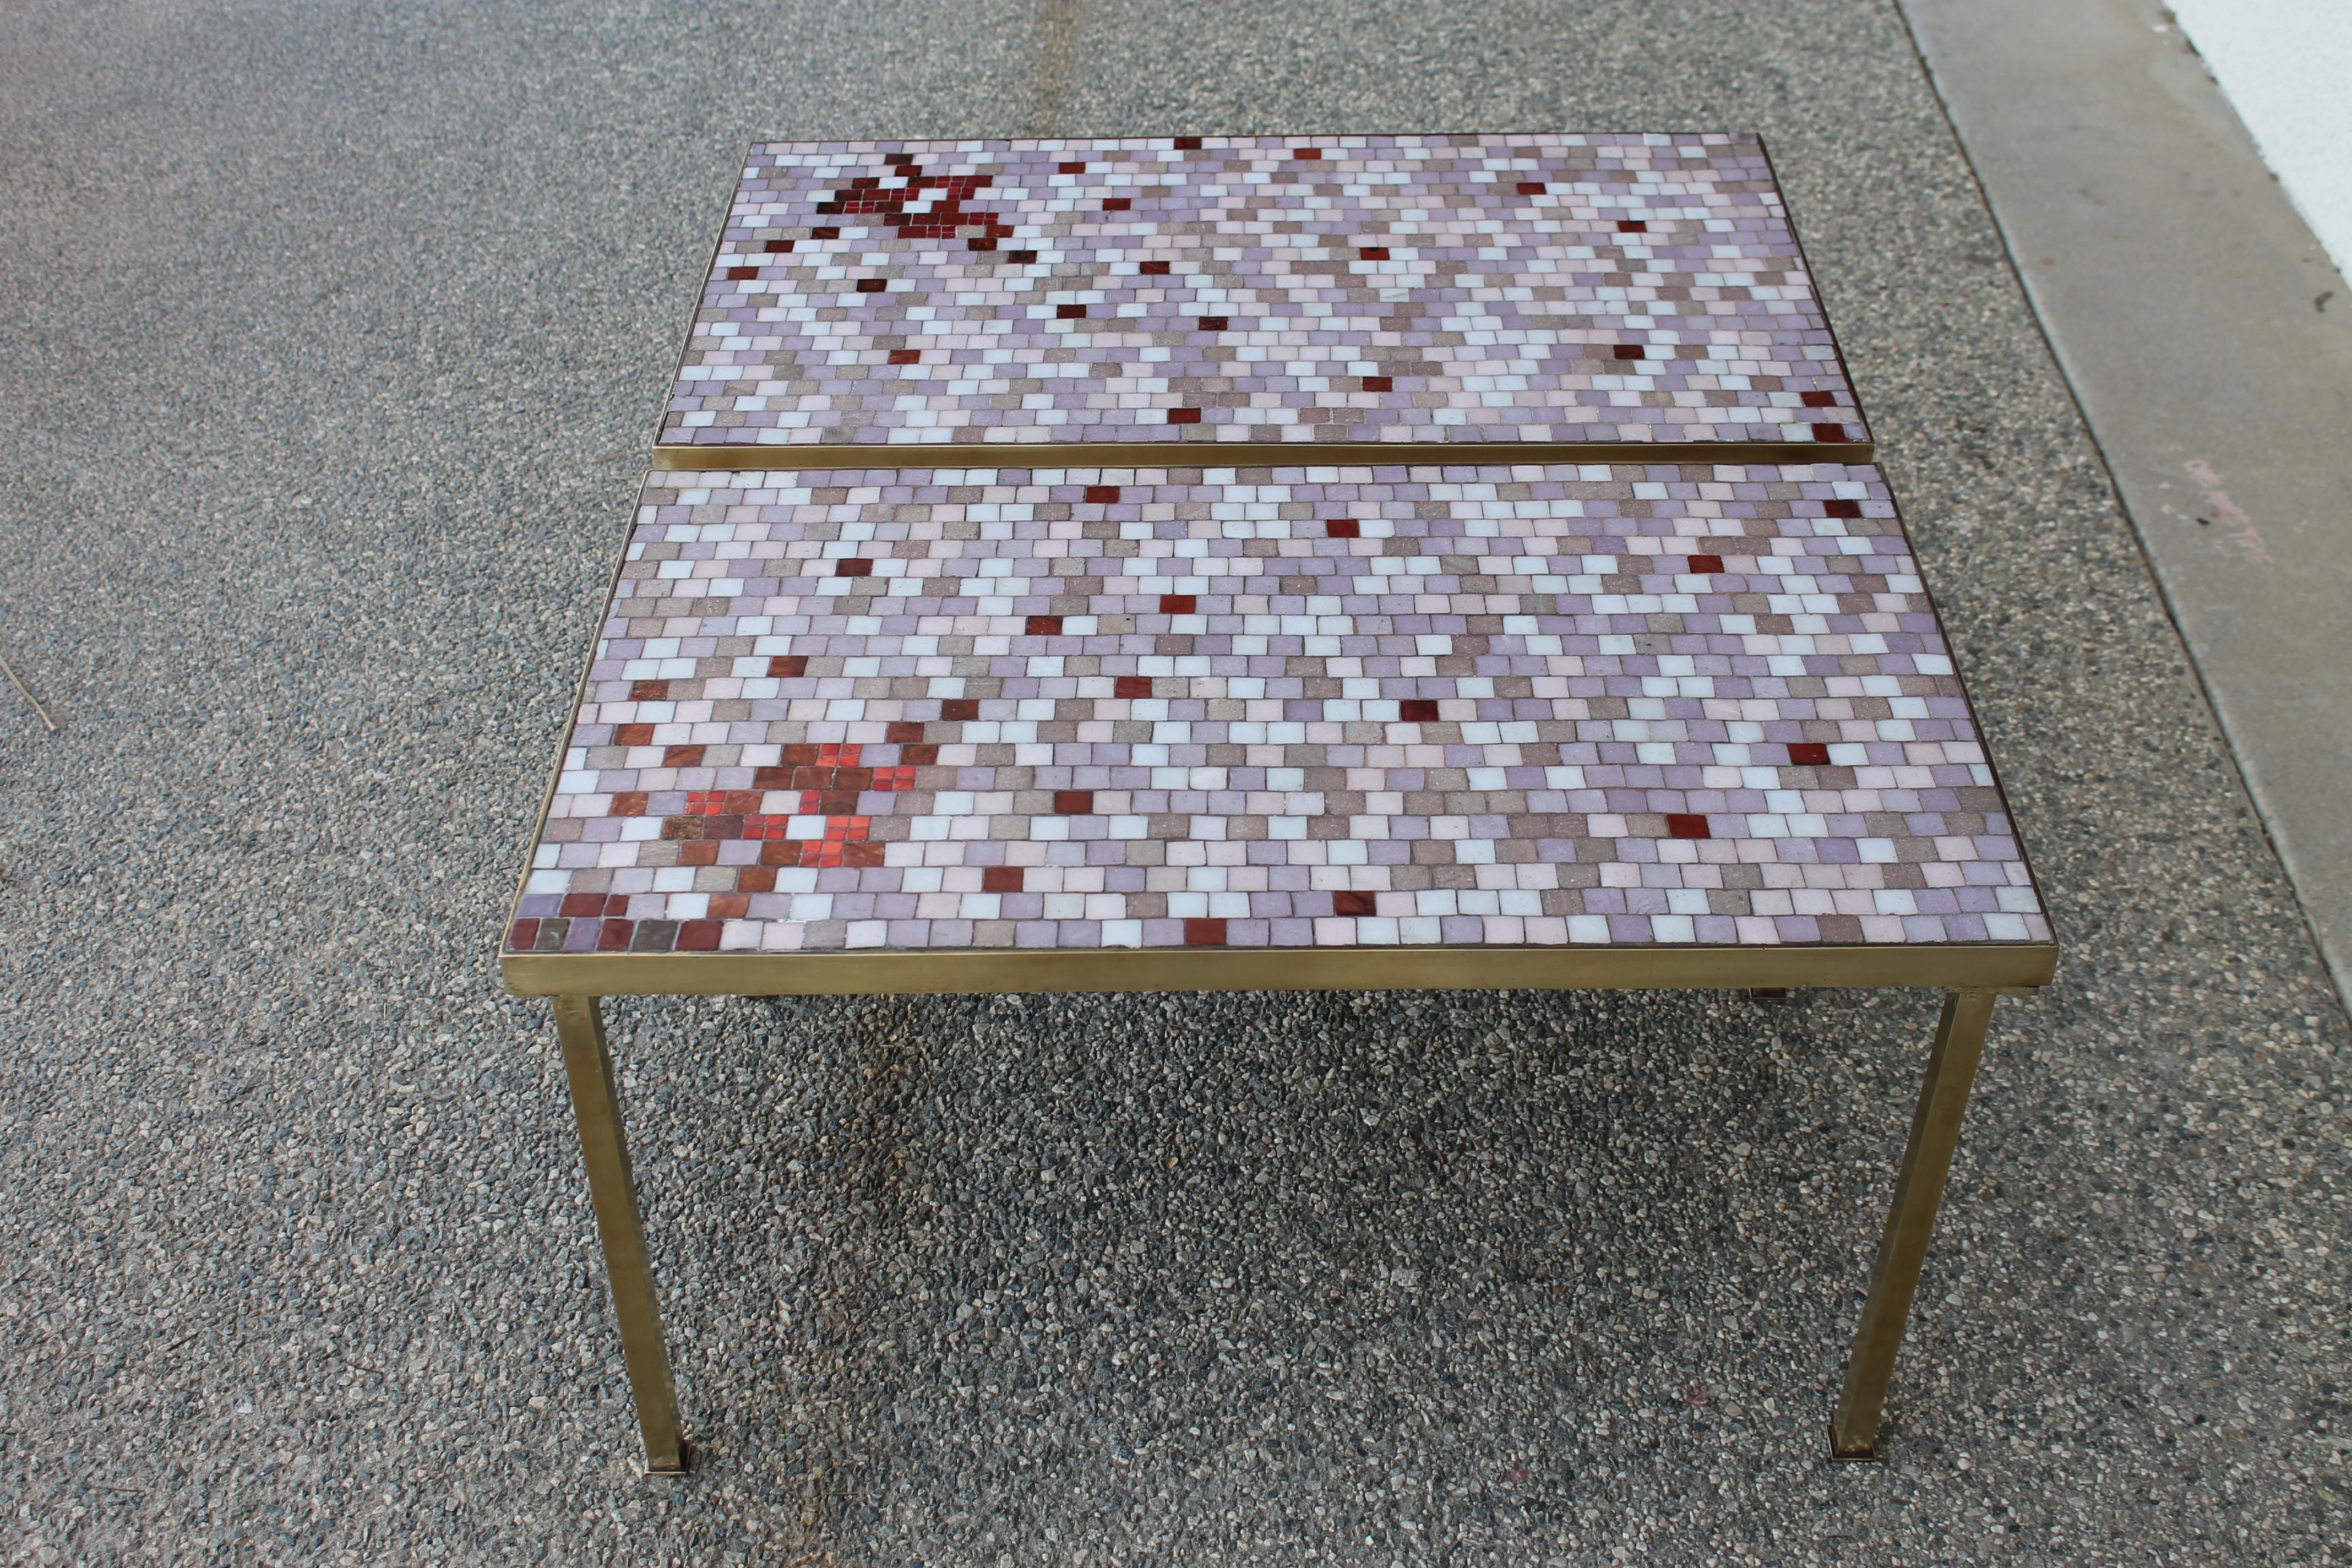 American Pair of Italian Glass Tile Tables in the style of Harvey Probber